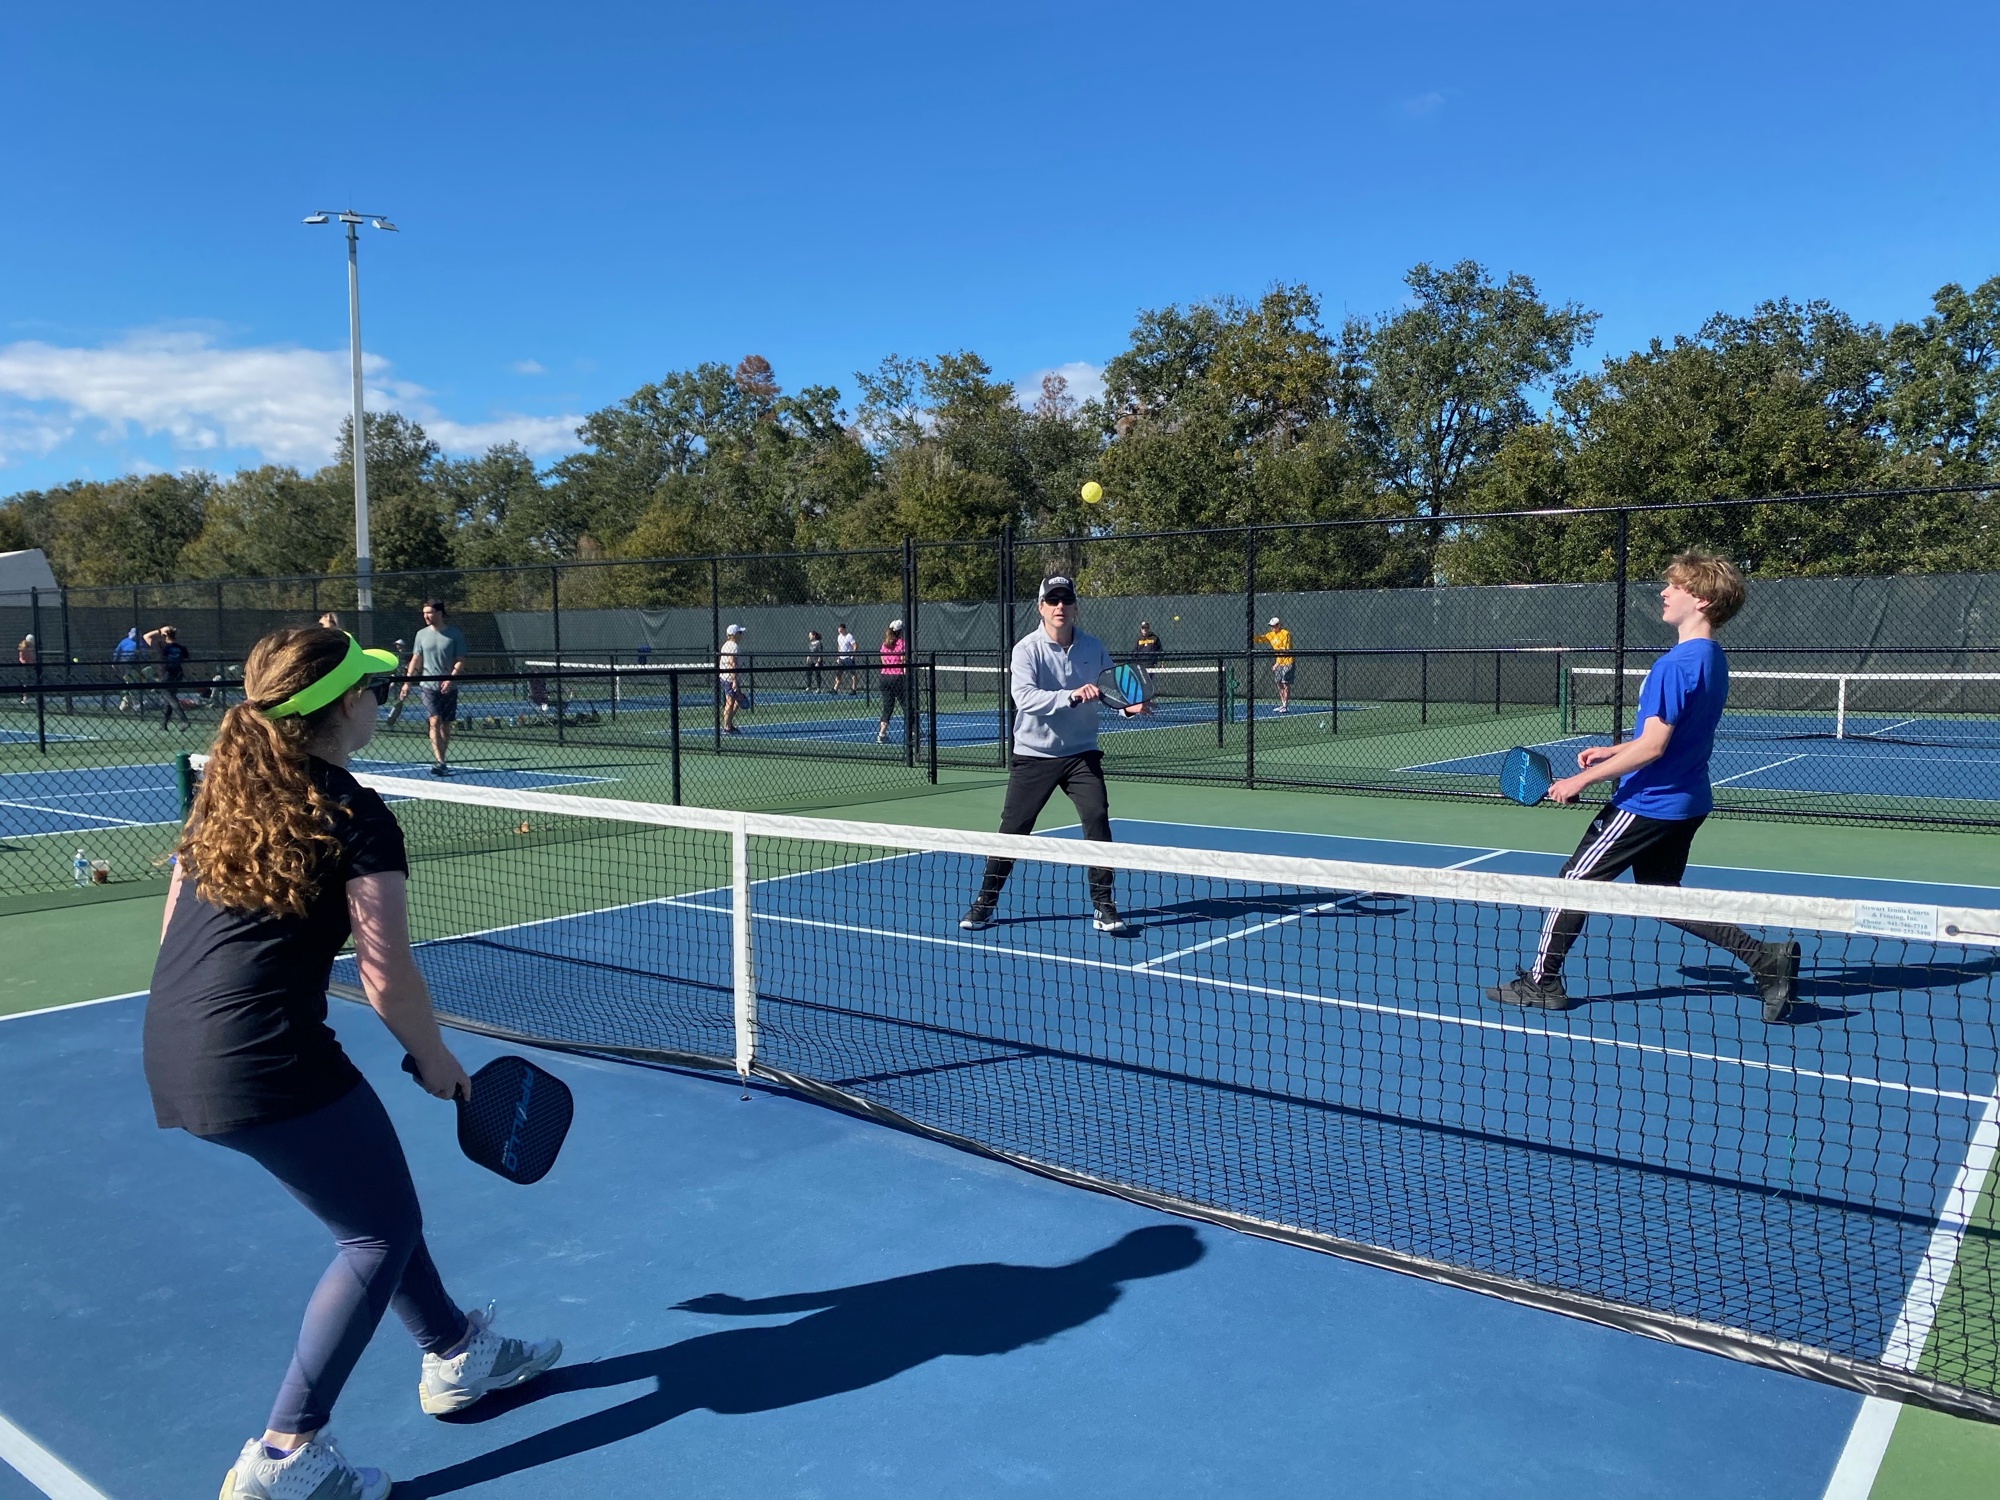 Courtesy, Leslie Healy. In addition to playing with colleagues, Michael Healy also regularly plays pickleball with his family, including his children, Asher and Kate Healy.